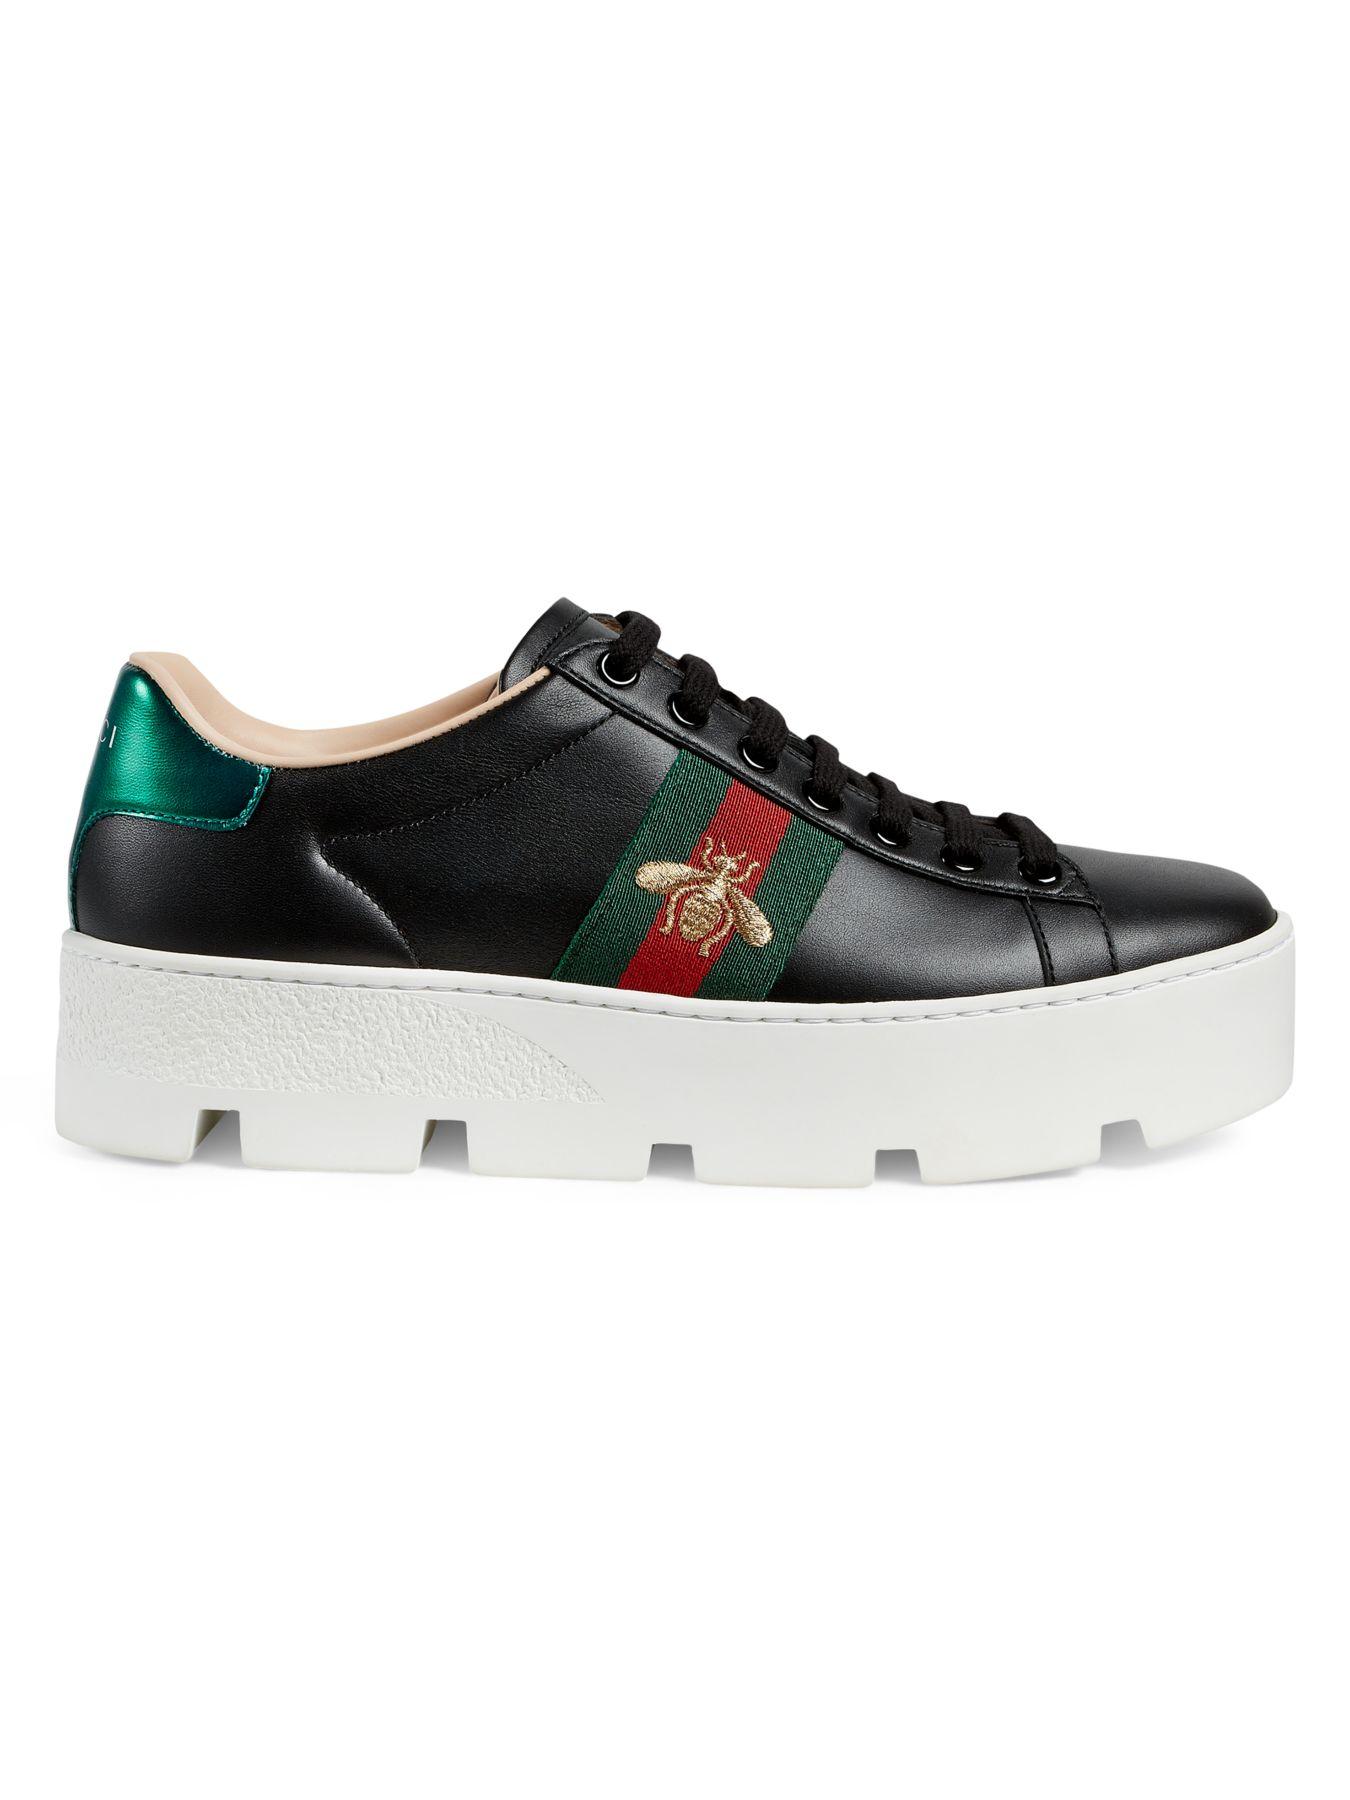 Gucci New Ace Leather Platform Sneakers in Black - Save 5% - Lyst